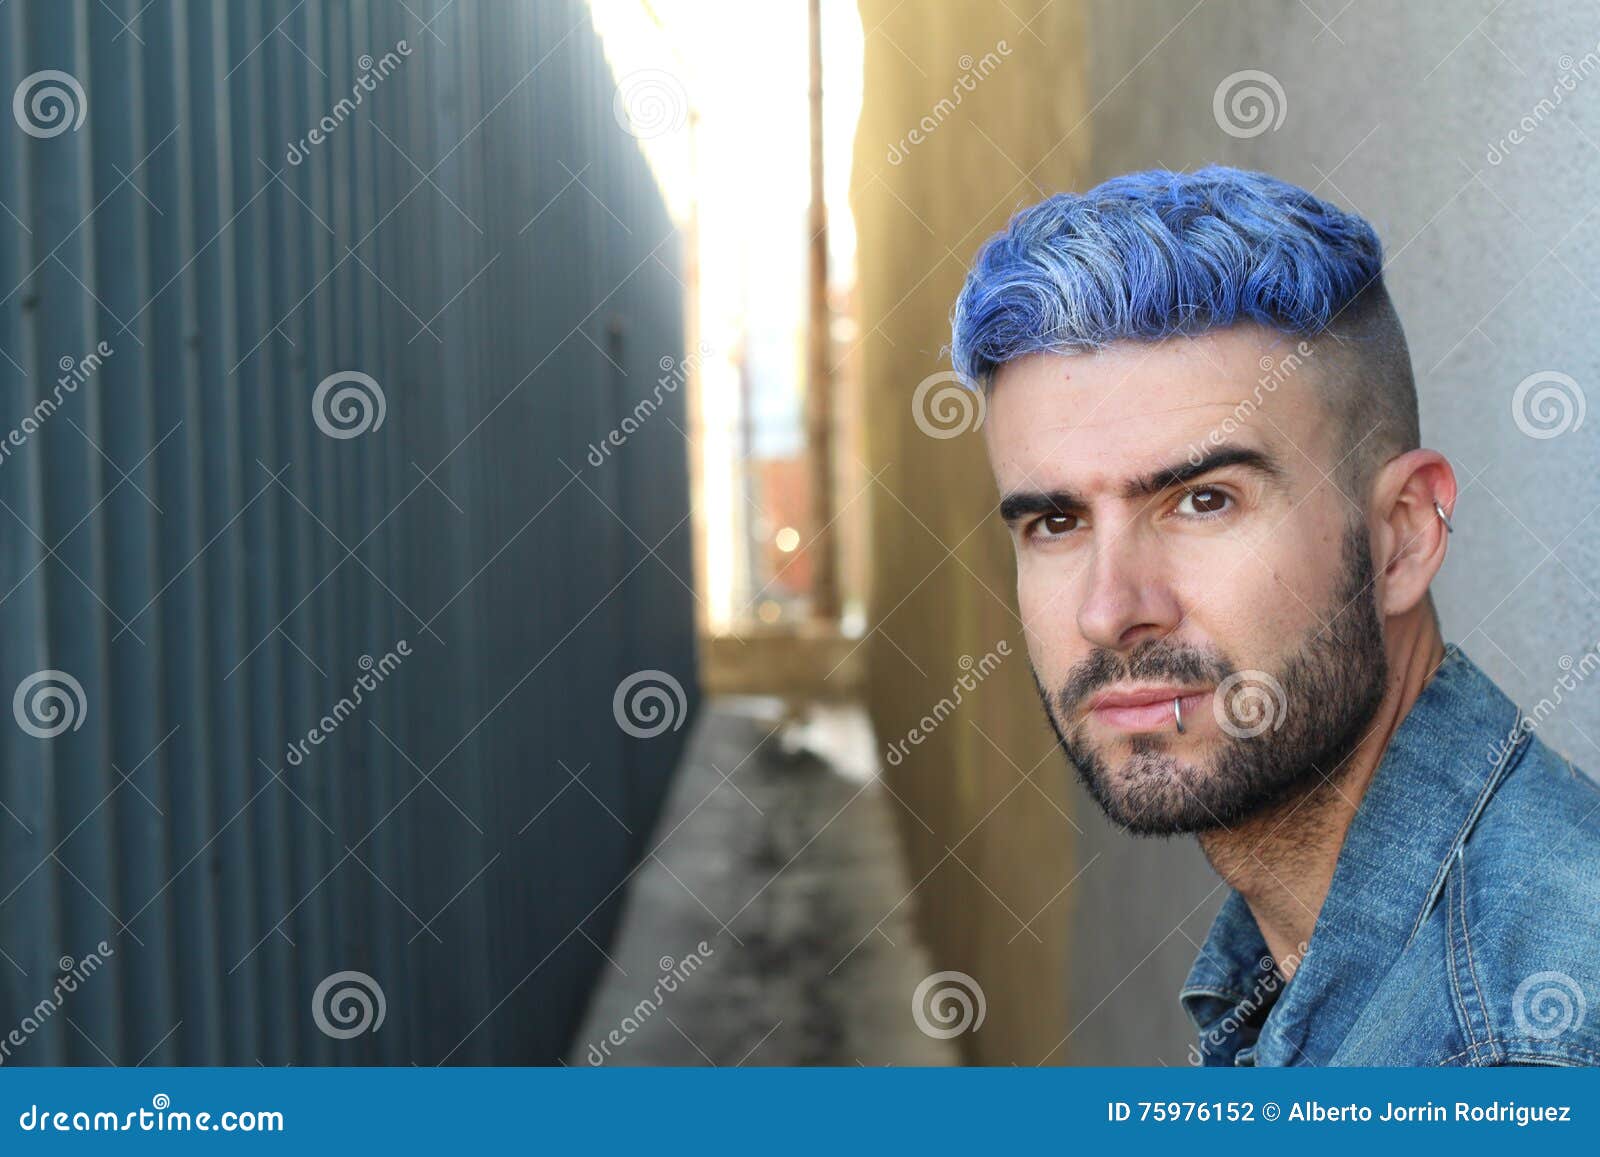 Blue-haired male model - wide 10